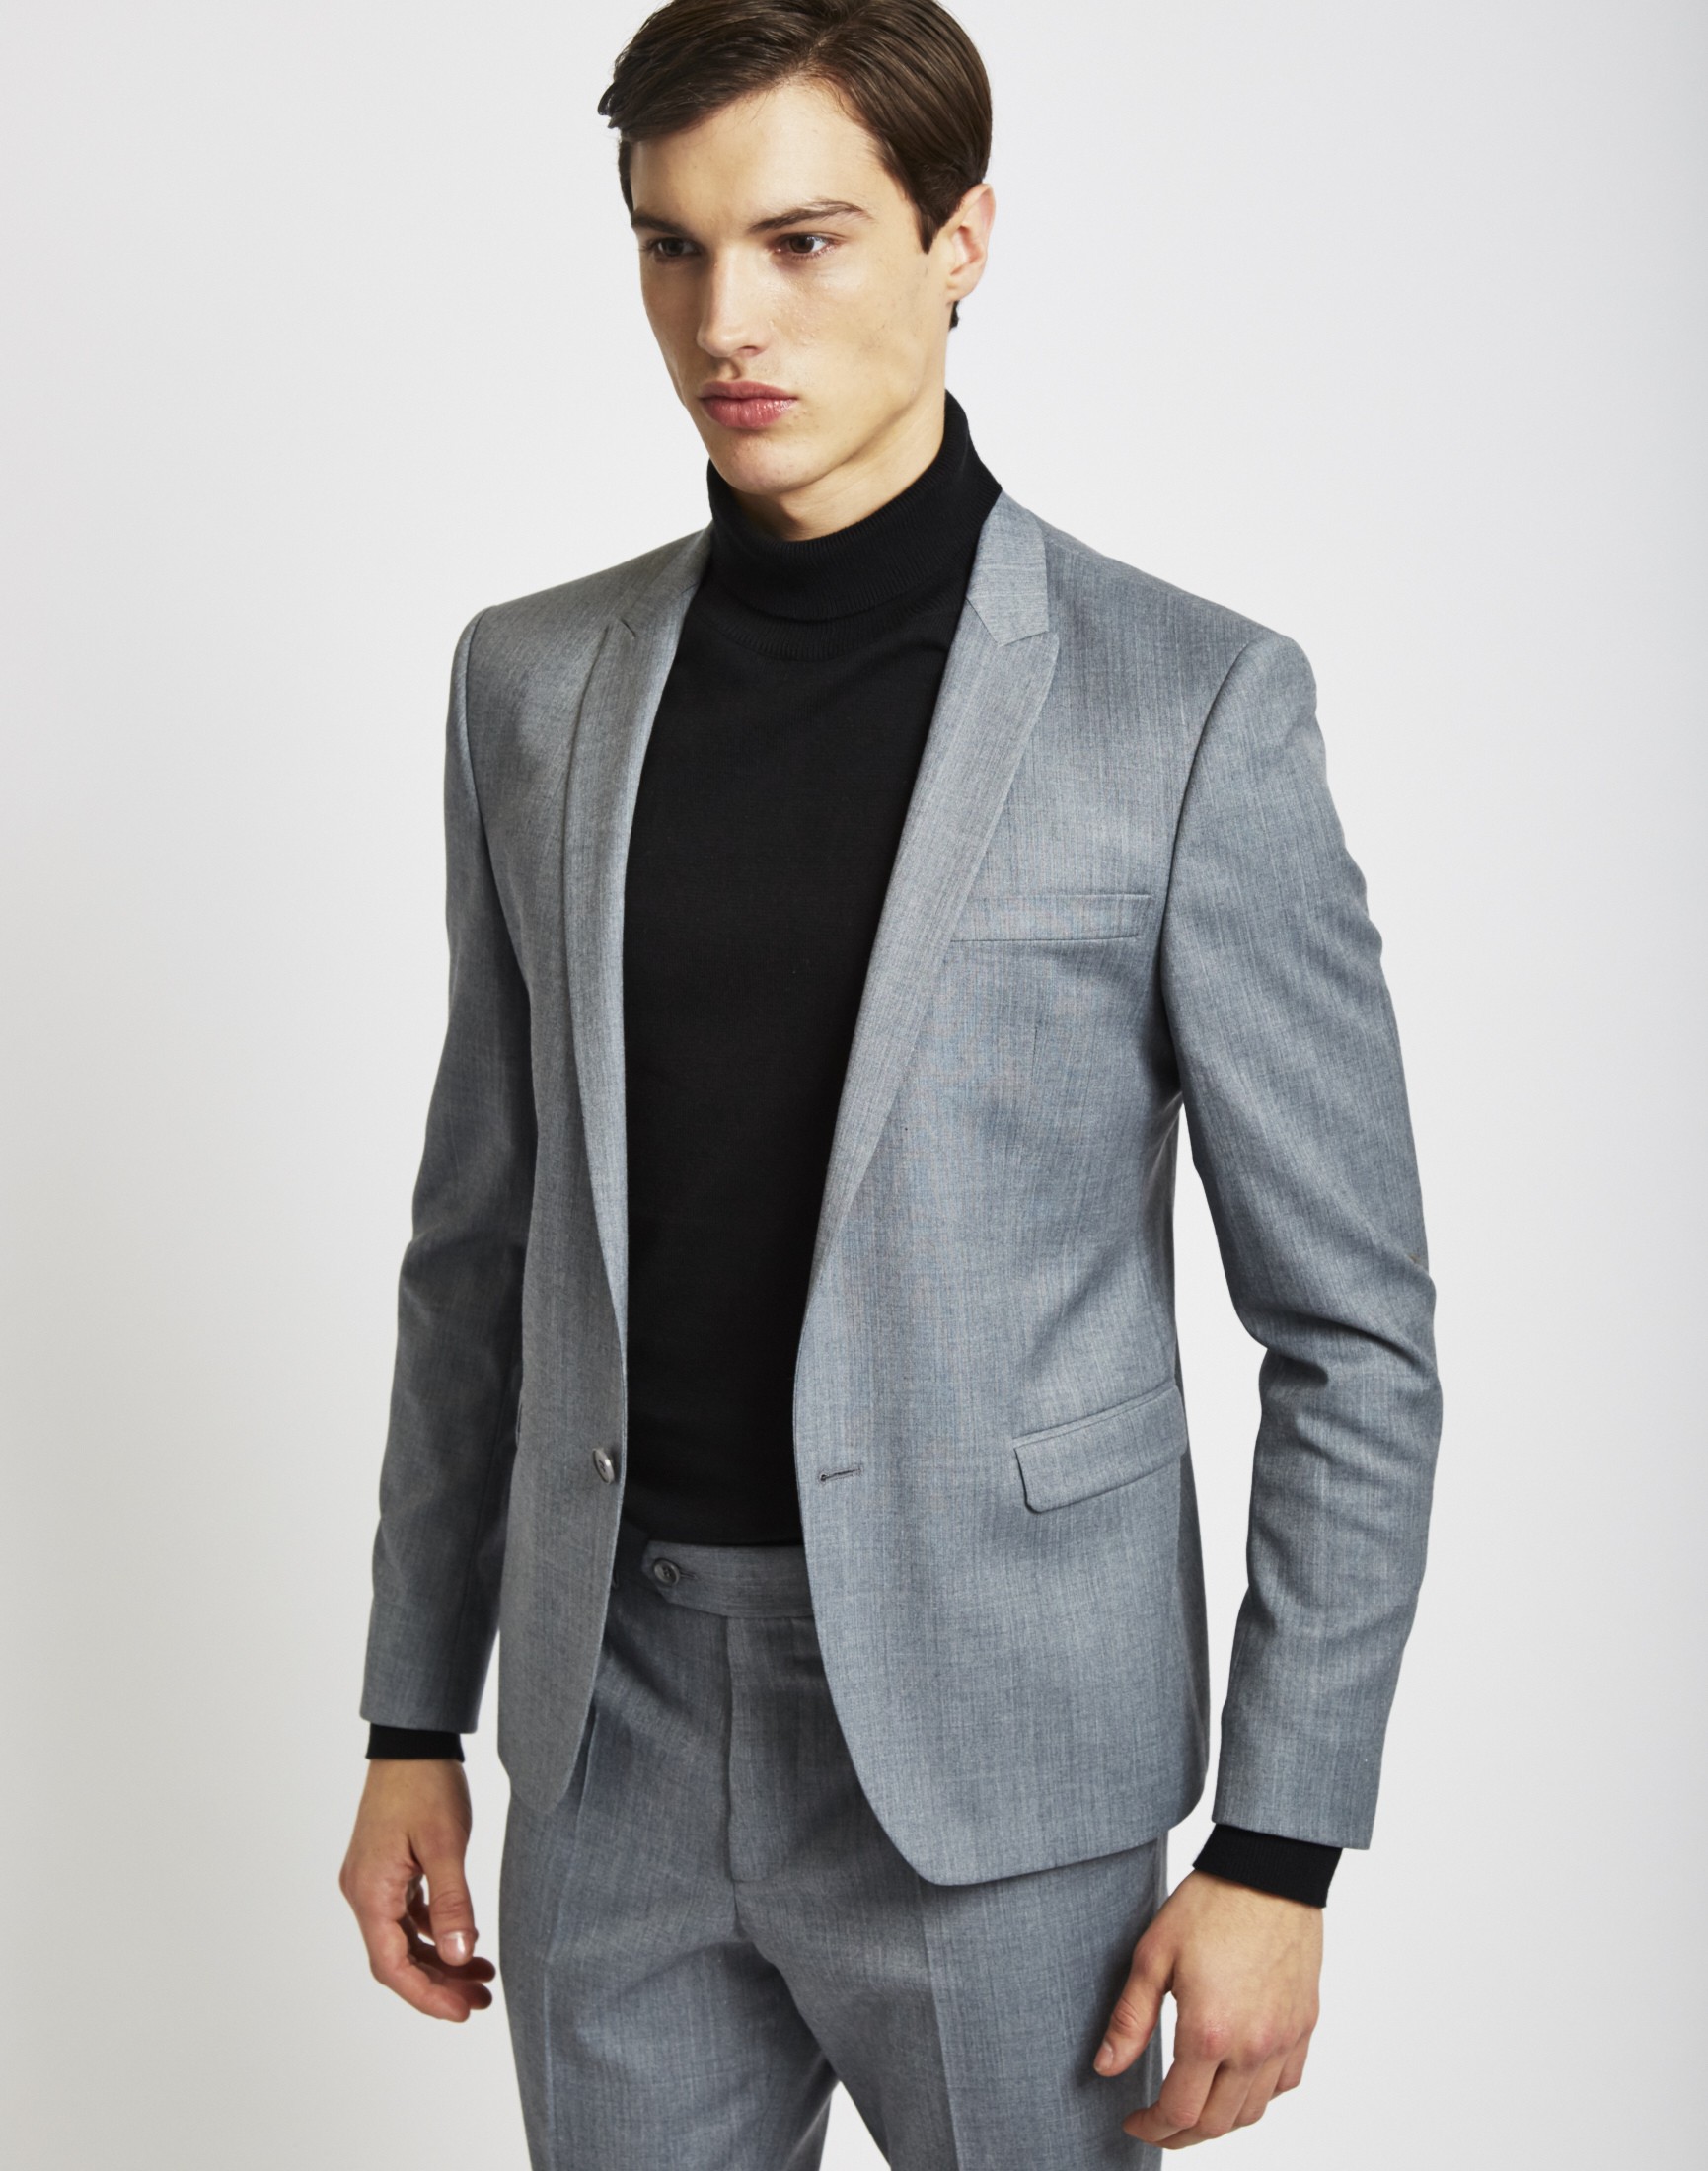 How to Wear a Suit Jacket | The Idle Man